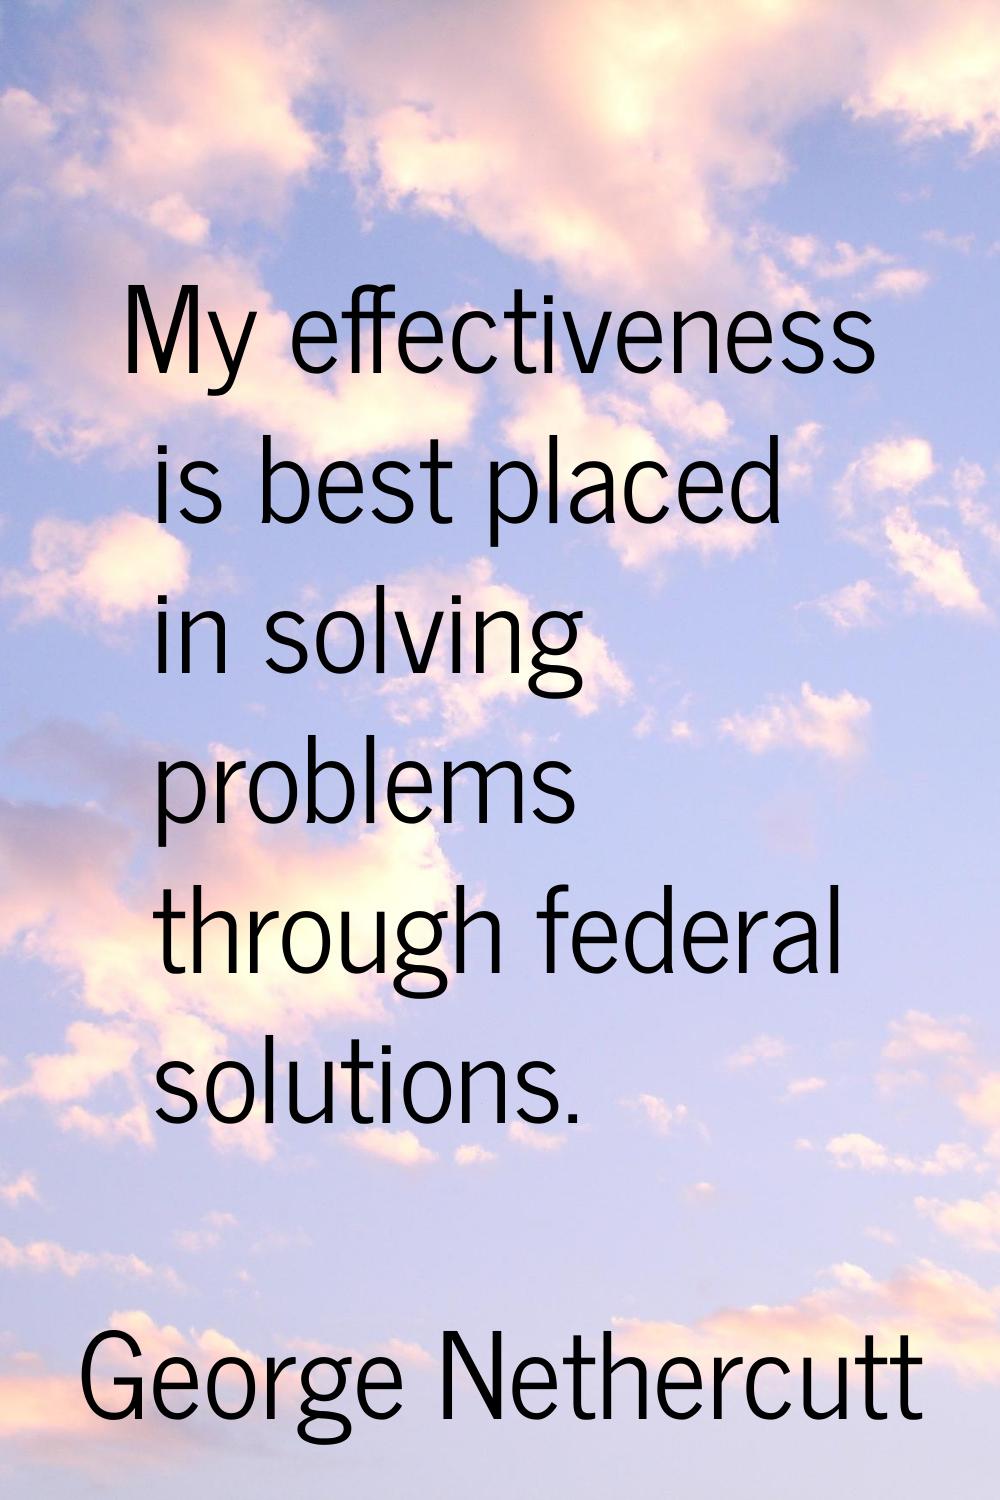 My effectiveness is best placed in solving problems through federal solutions.